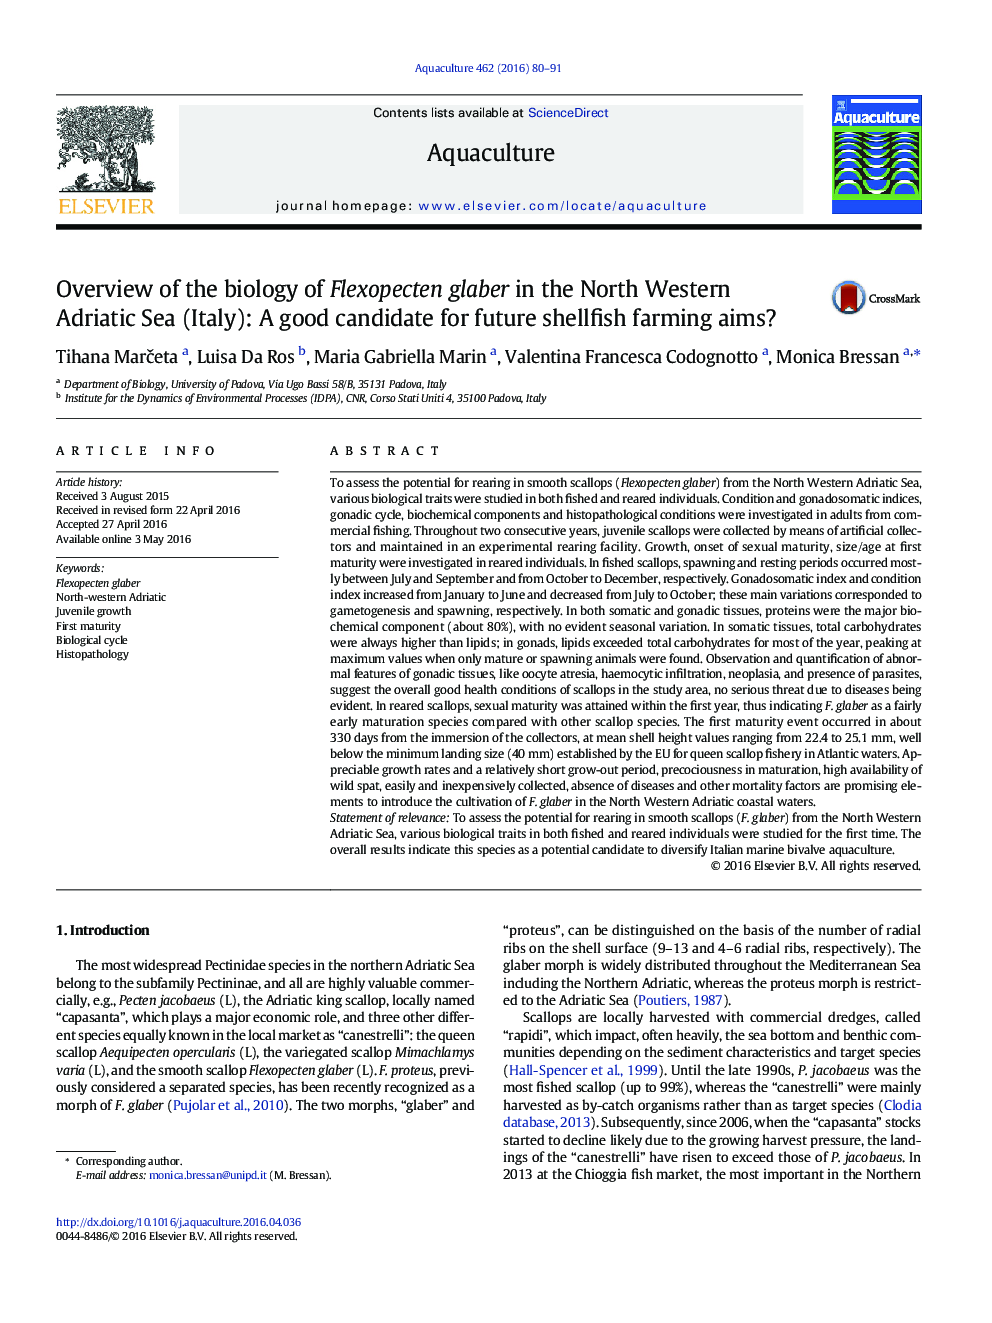 Overview of the biology of Flexopecten glaber in the North Western Adriatic Sea (Italy): A good candidate for future shellfish farming aims?